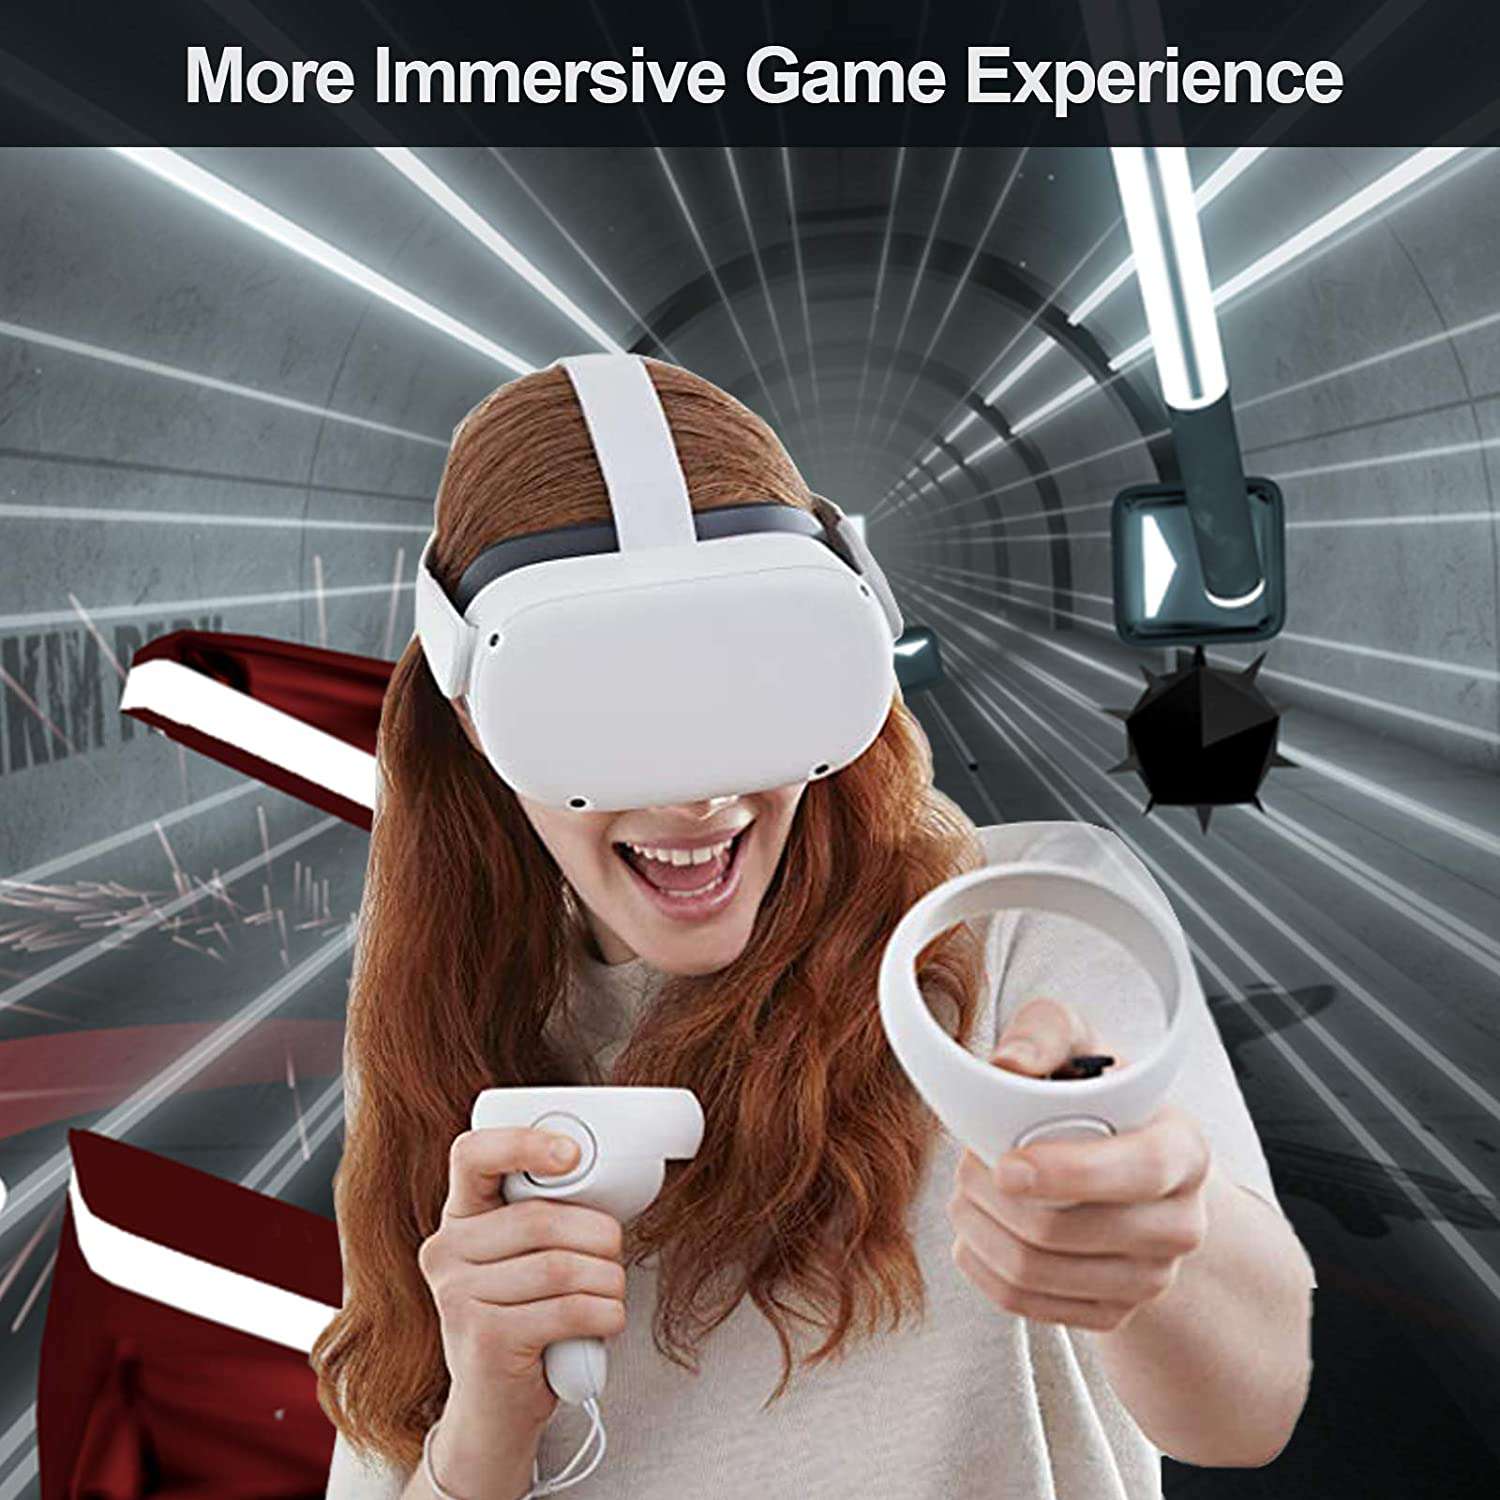 Solo gaming with Touch Controller for an immersive gaming experience.